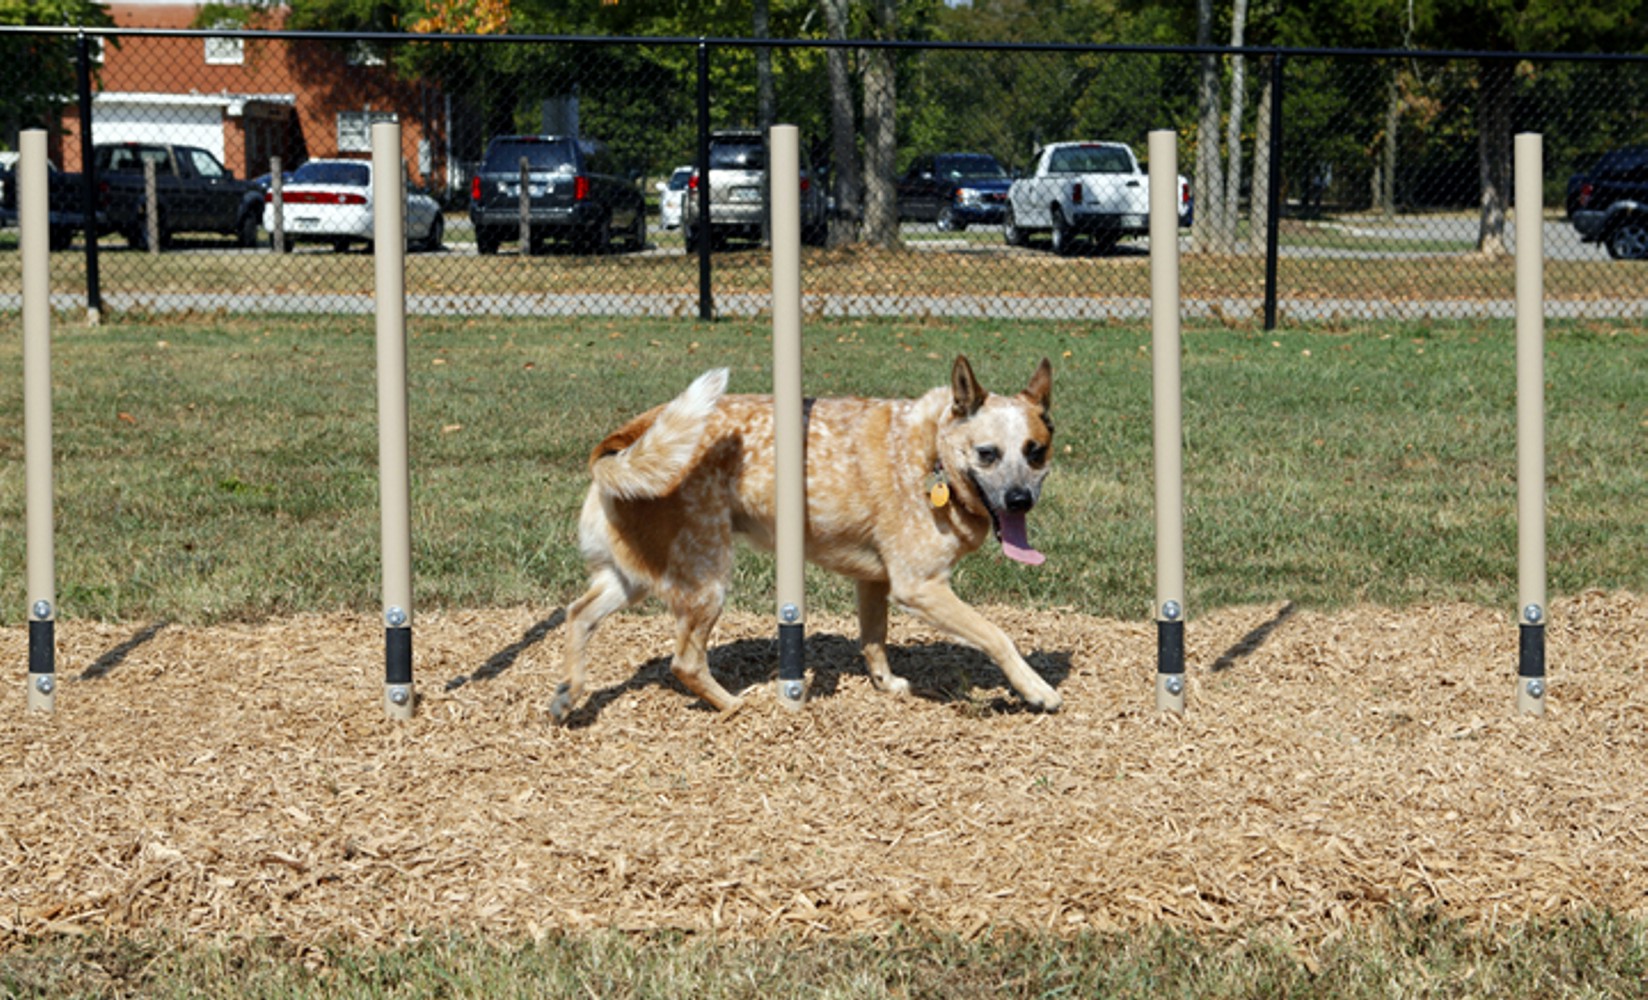 Weave Posts - Dog Park Equipment - American Parks Company